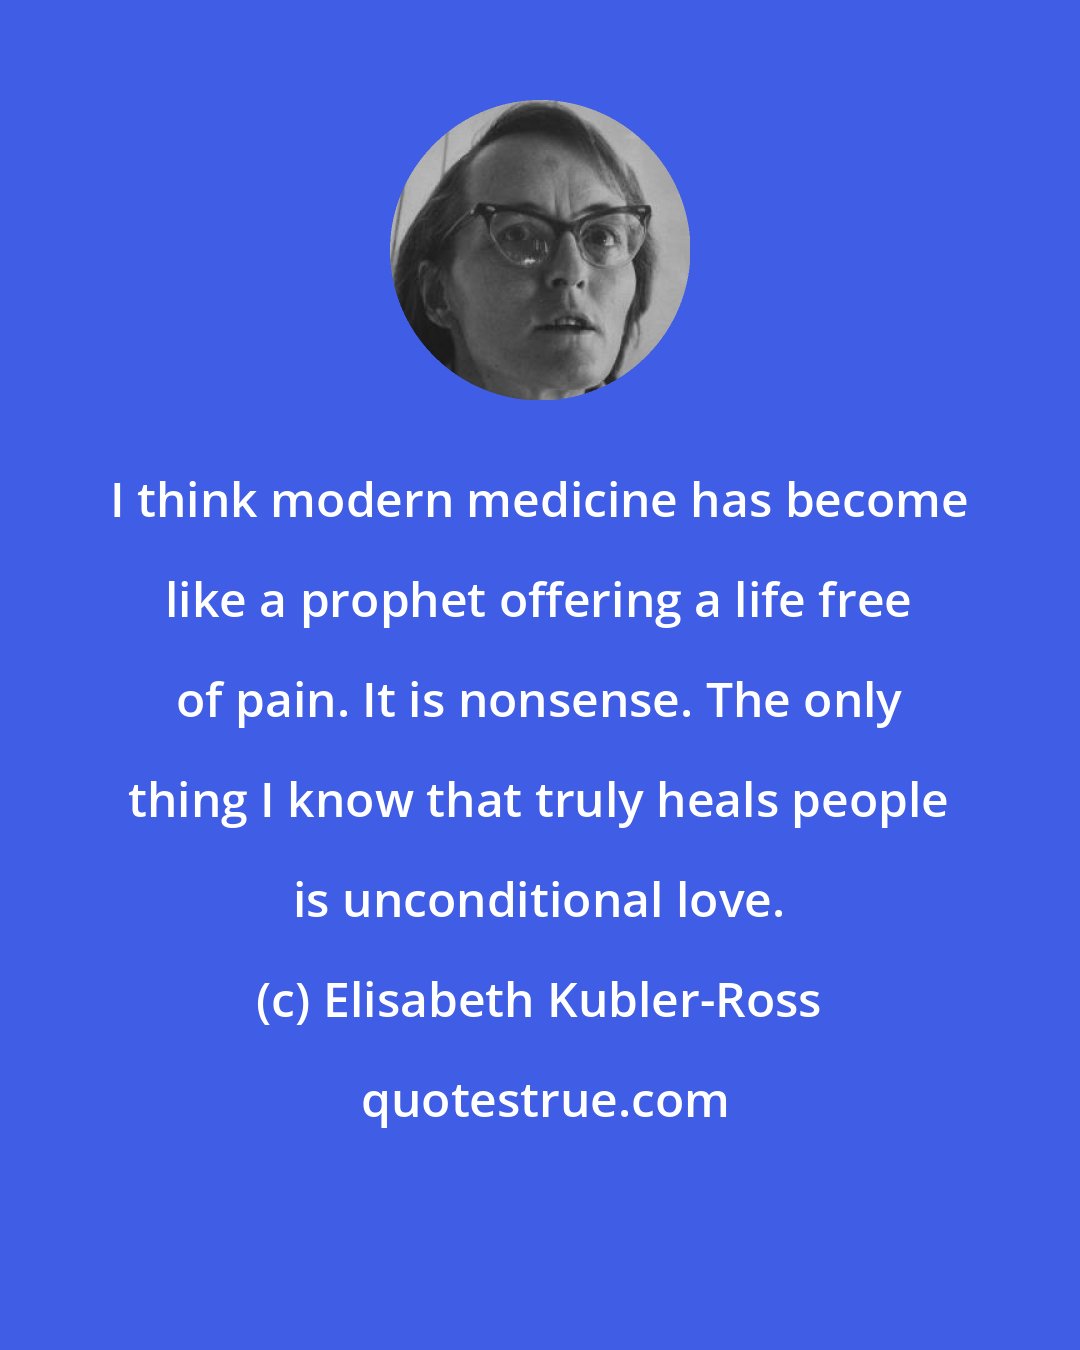 Elisabeth Kubler-Ross: I think modern medicine has become like a prophet offering a life free of pain. It is nonsense. The only thing I know that truly heals people is unconditional love.